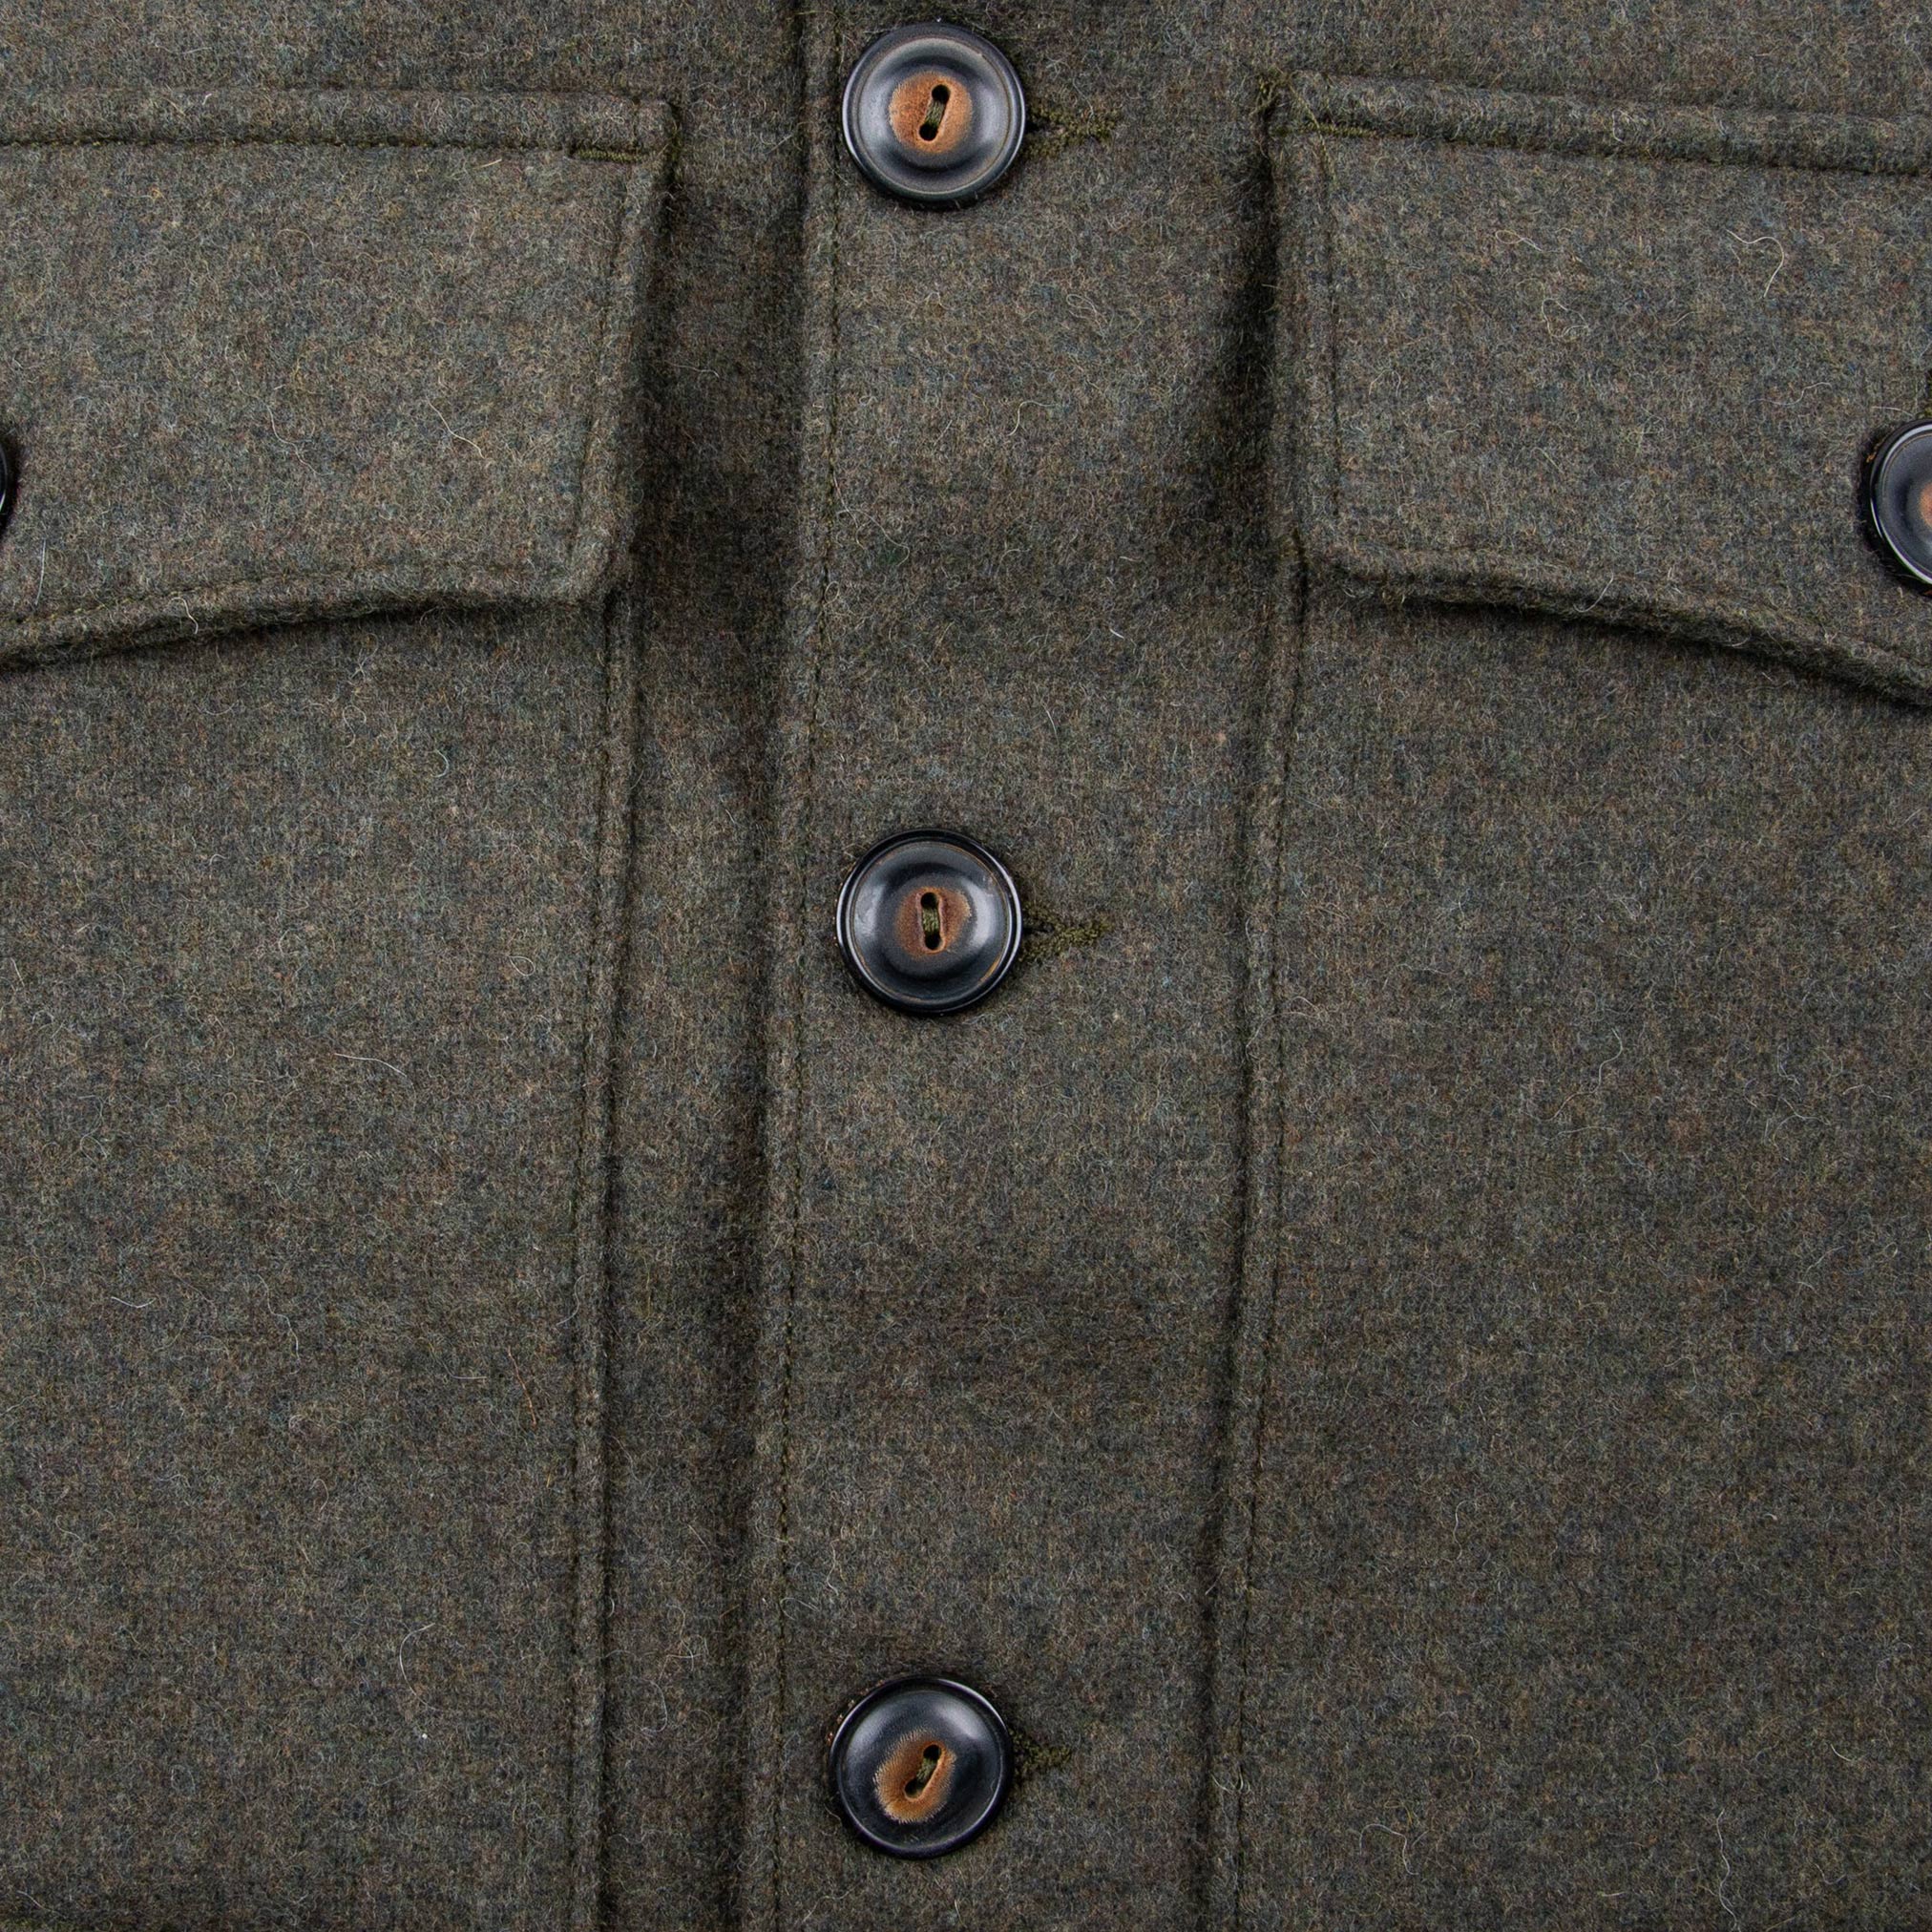 Midway CPO Shirt Jacket in Olive Wool